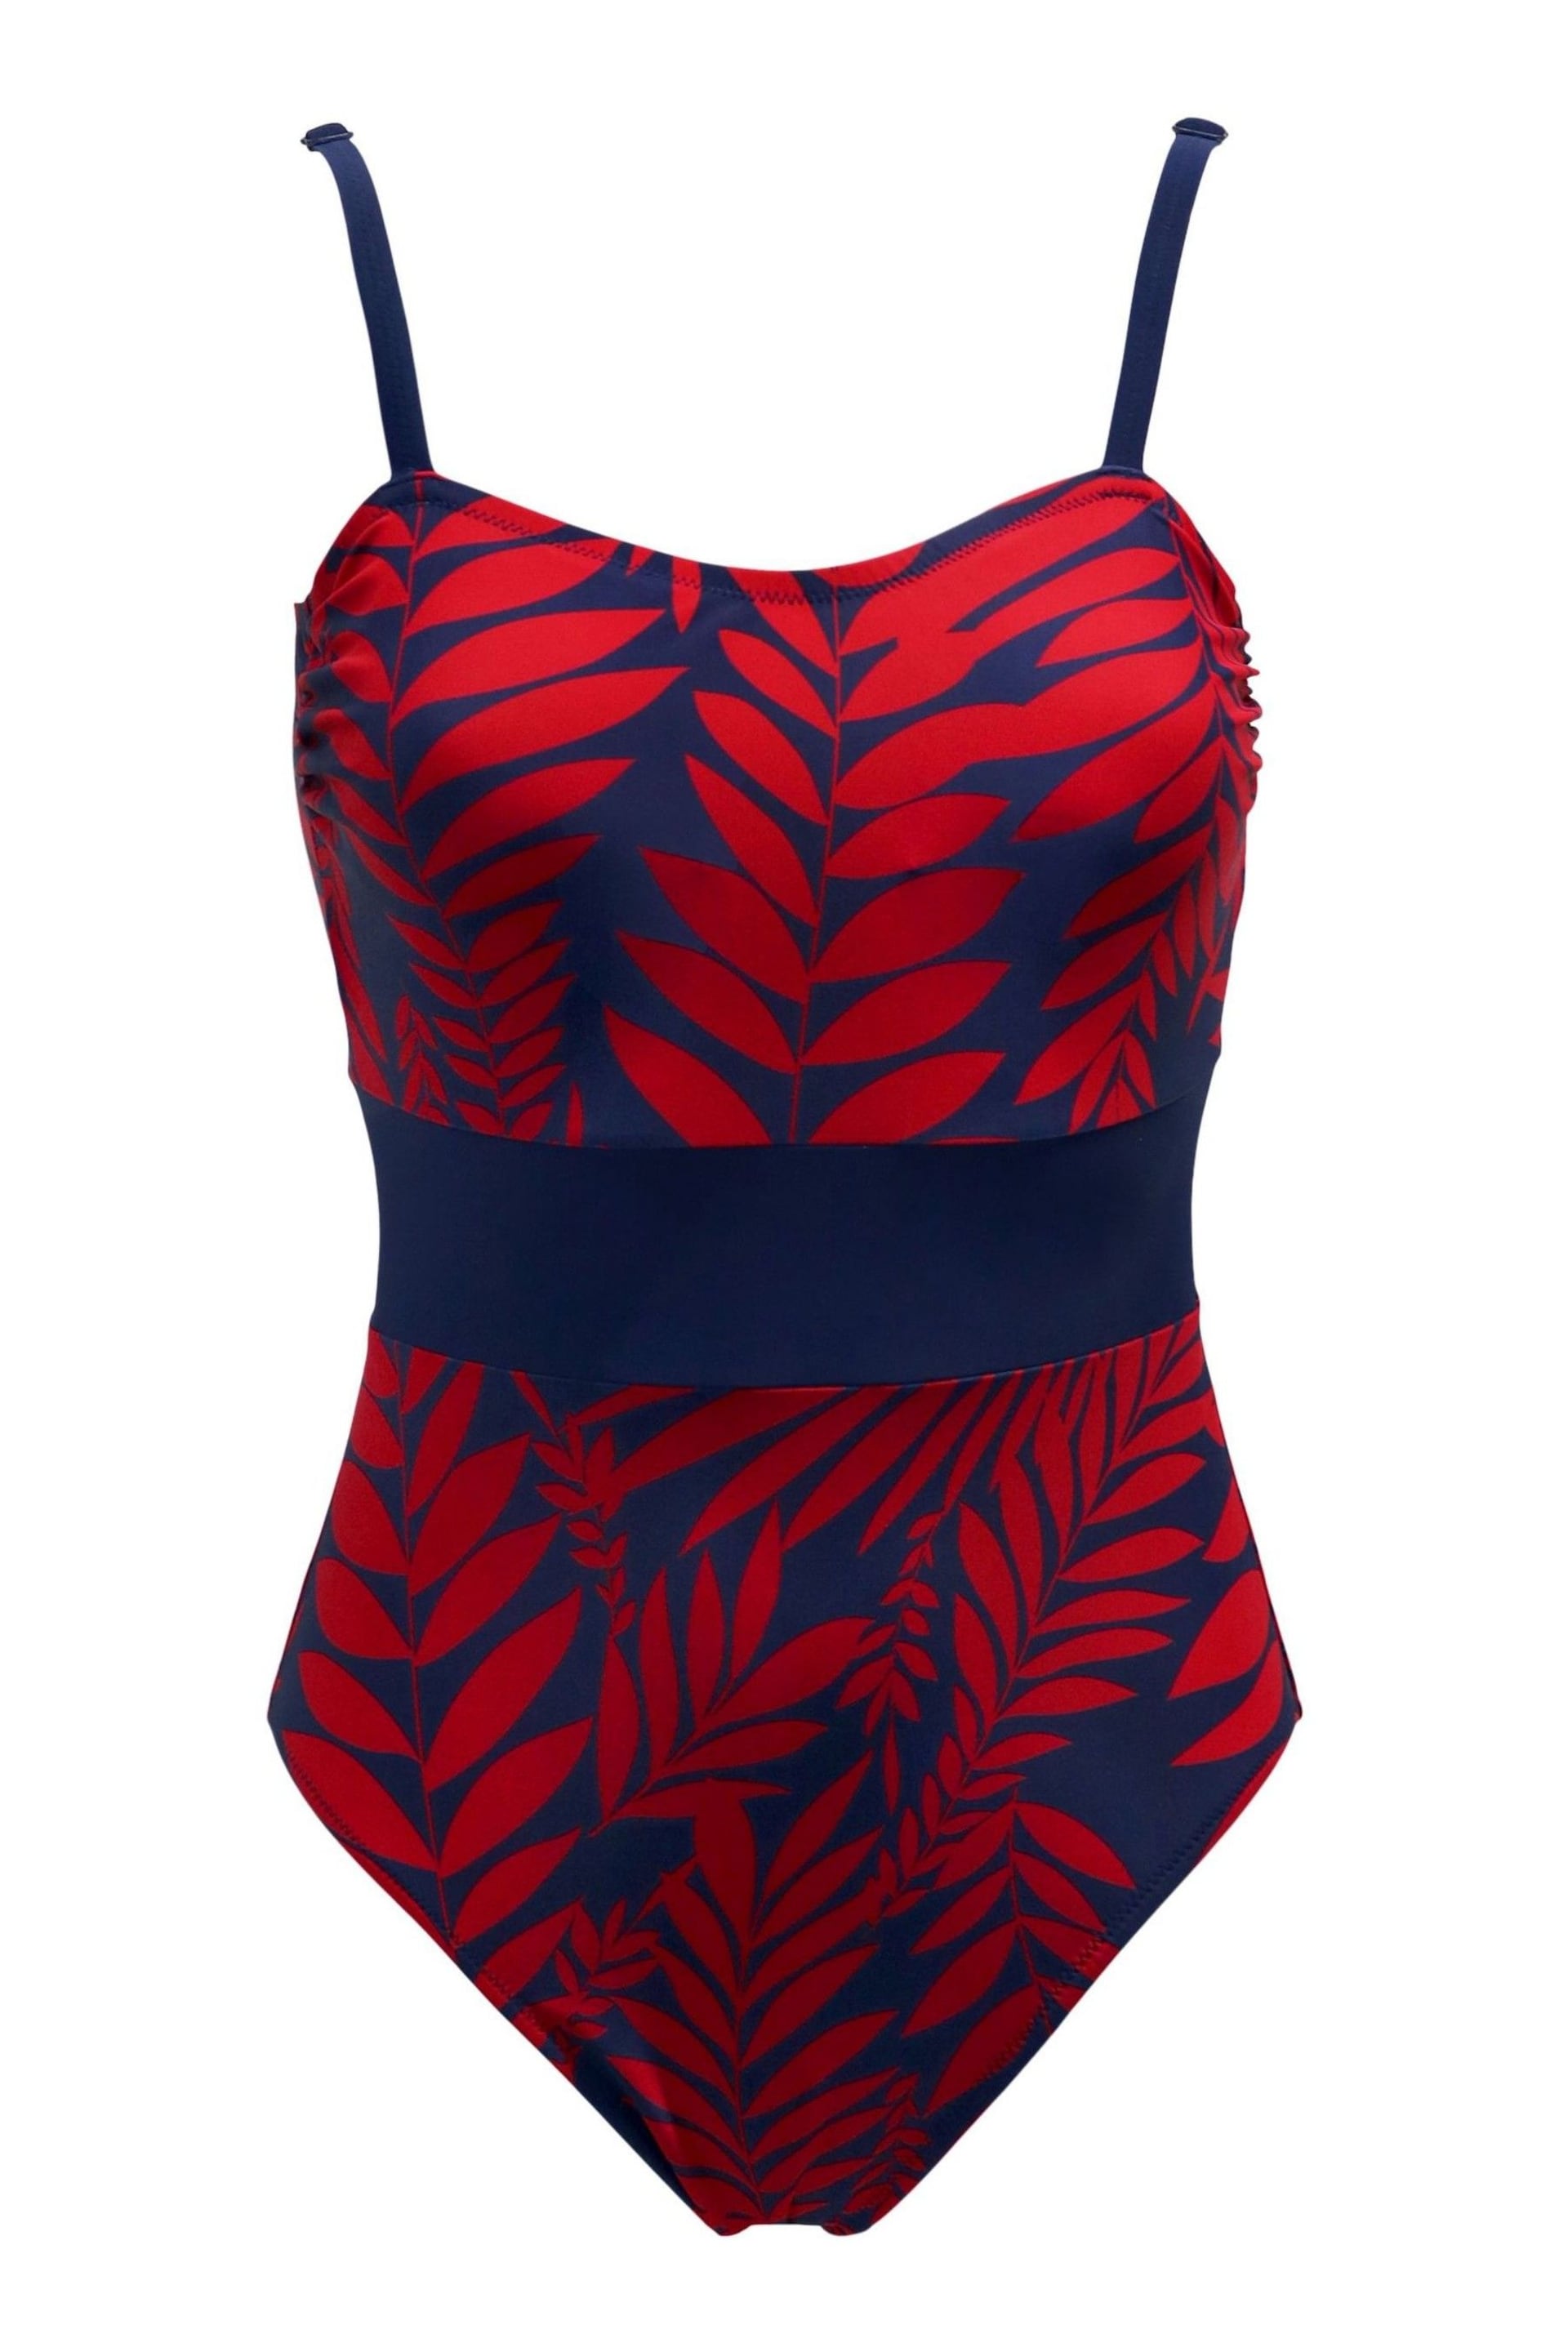 Pour Moi Blue Palermo Panelled Control Swimsuit - Image 3 of 4